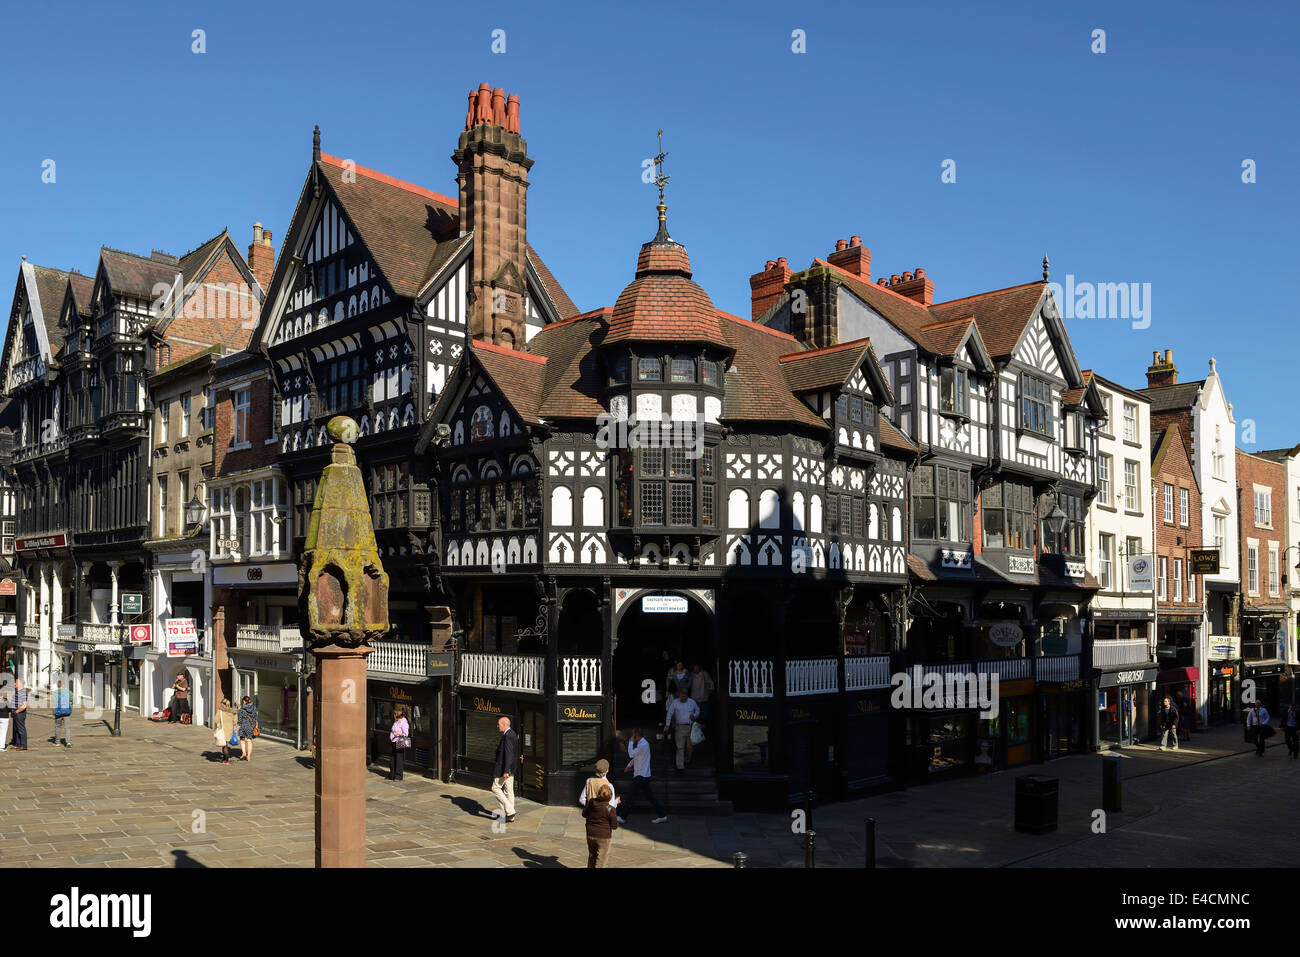 Black and white timber framed shops and buildings at The Cross in Chester city centre UK Stock Photo